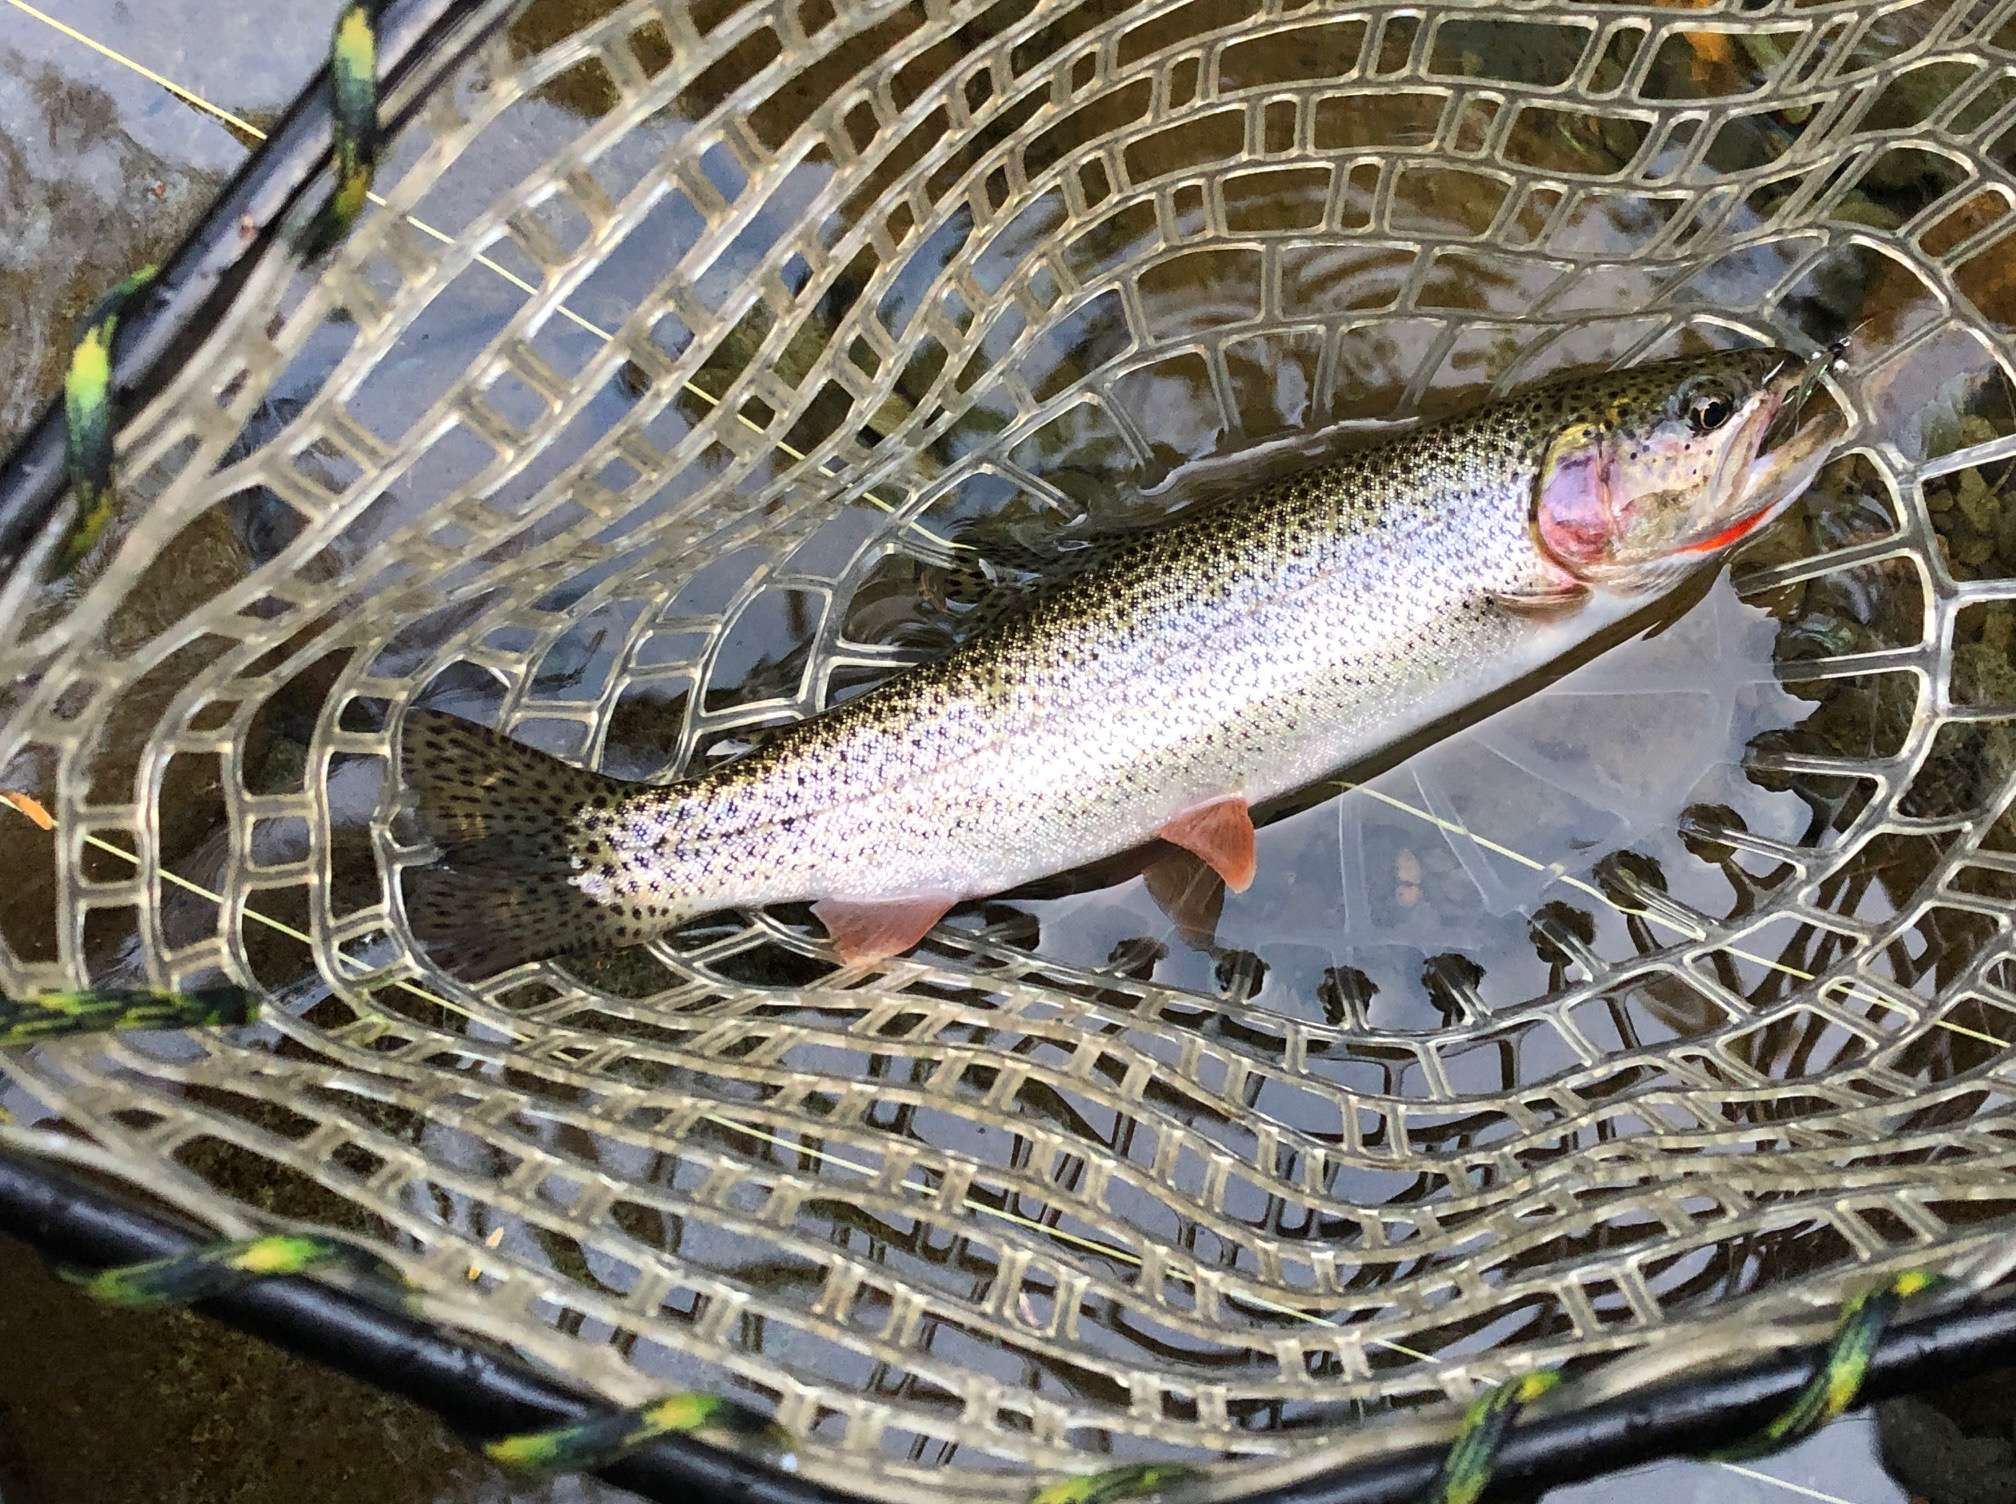 A fish in a net caught at Fish Creek.